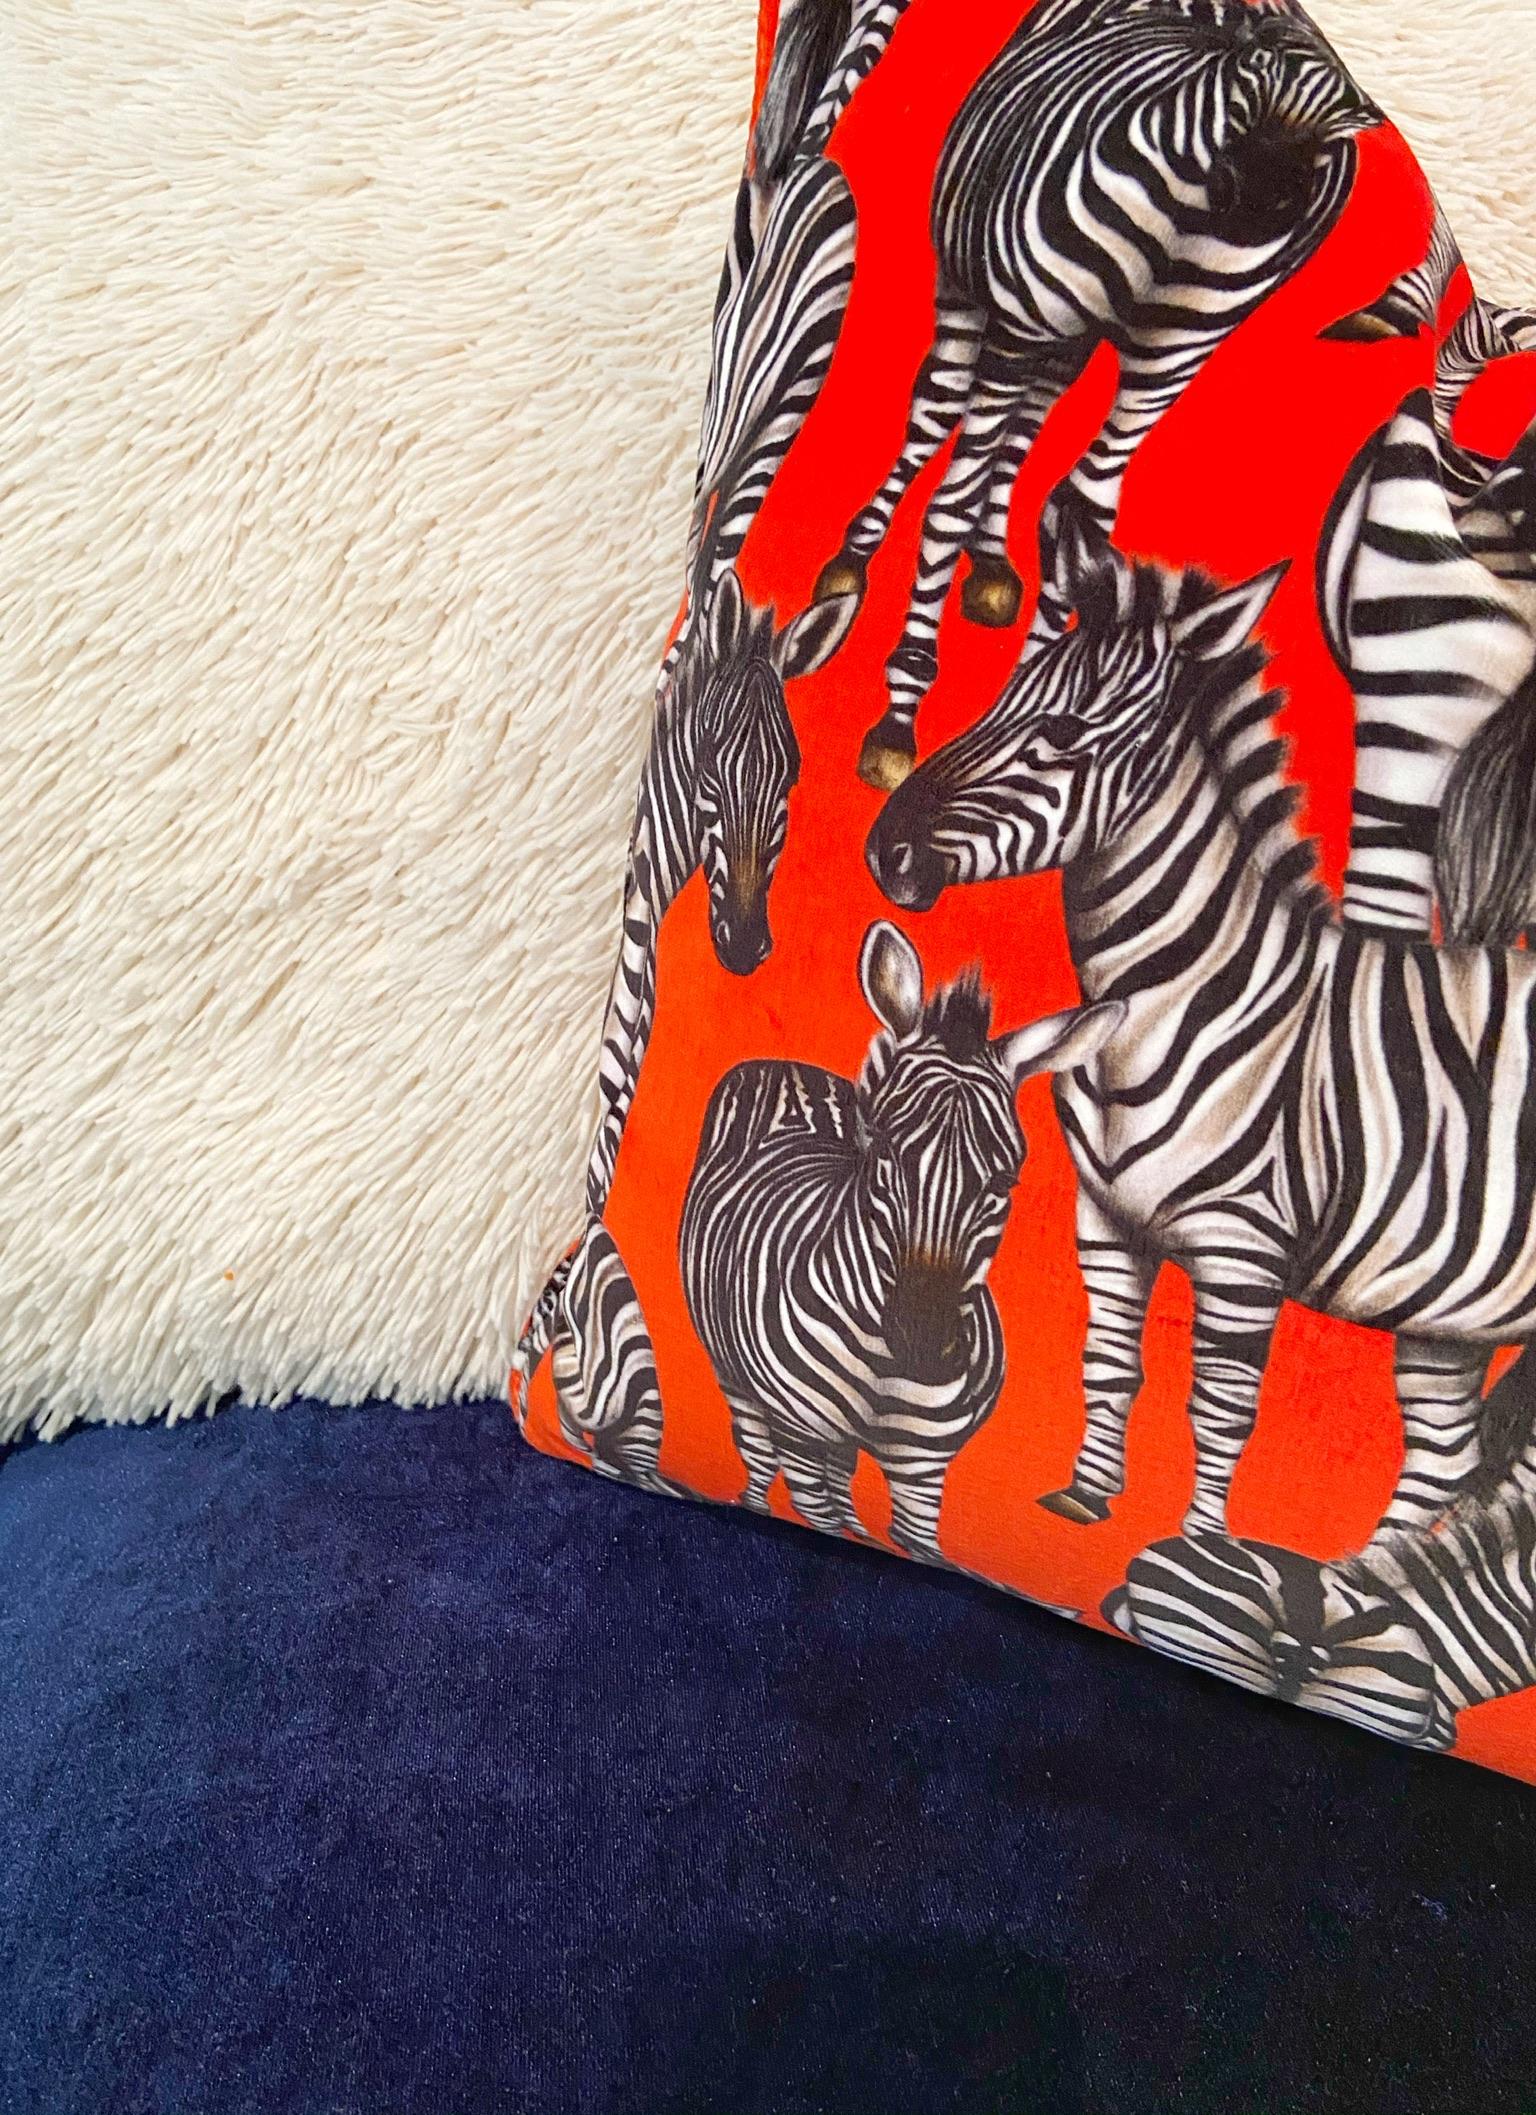 Red velvet zebra animal pillow.

This hand-drawn print by artist Charlotte Jade captures the zebra in a playful and yet eye-catching way. The zebras are extremely realistic and on this beautiful shade of red, will add that quirky and unique touch